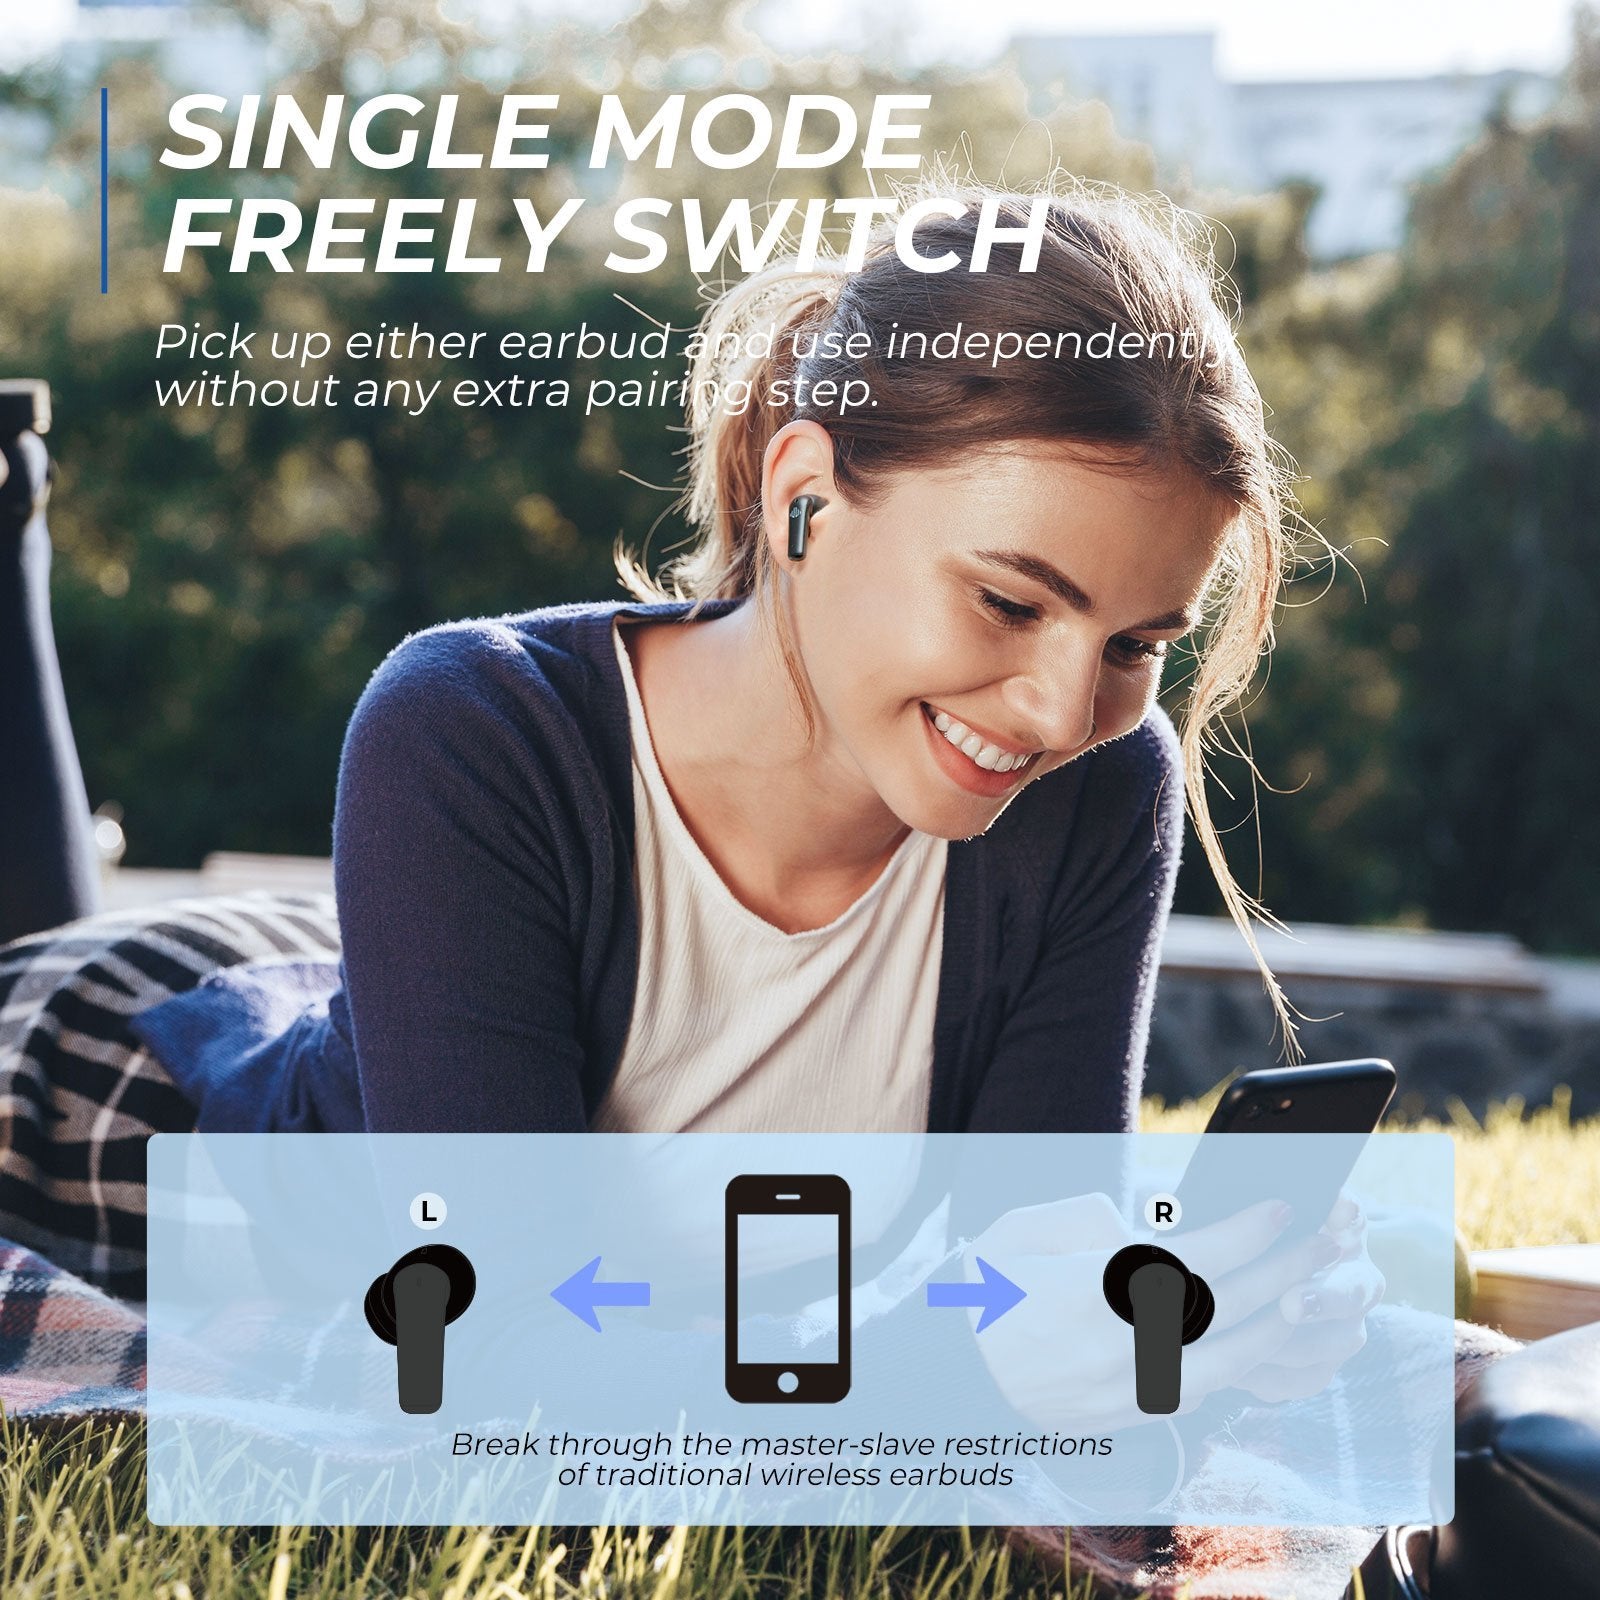 single mode freely switch